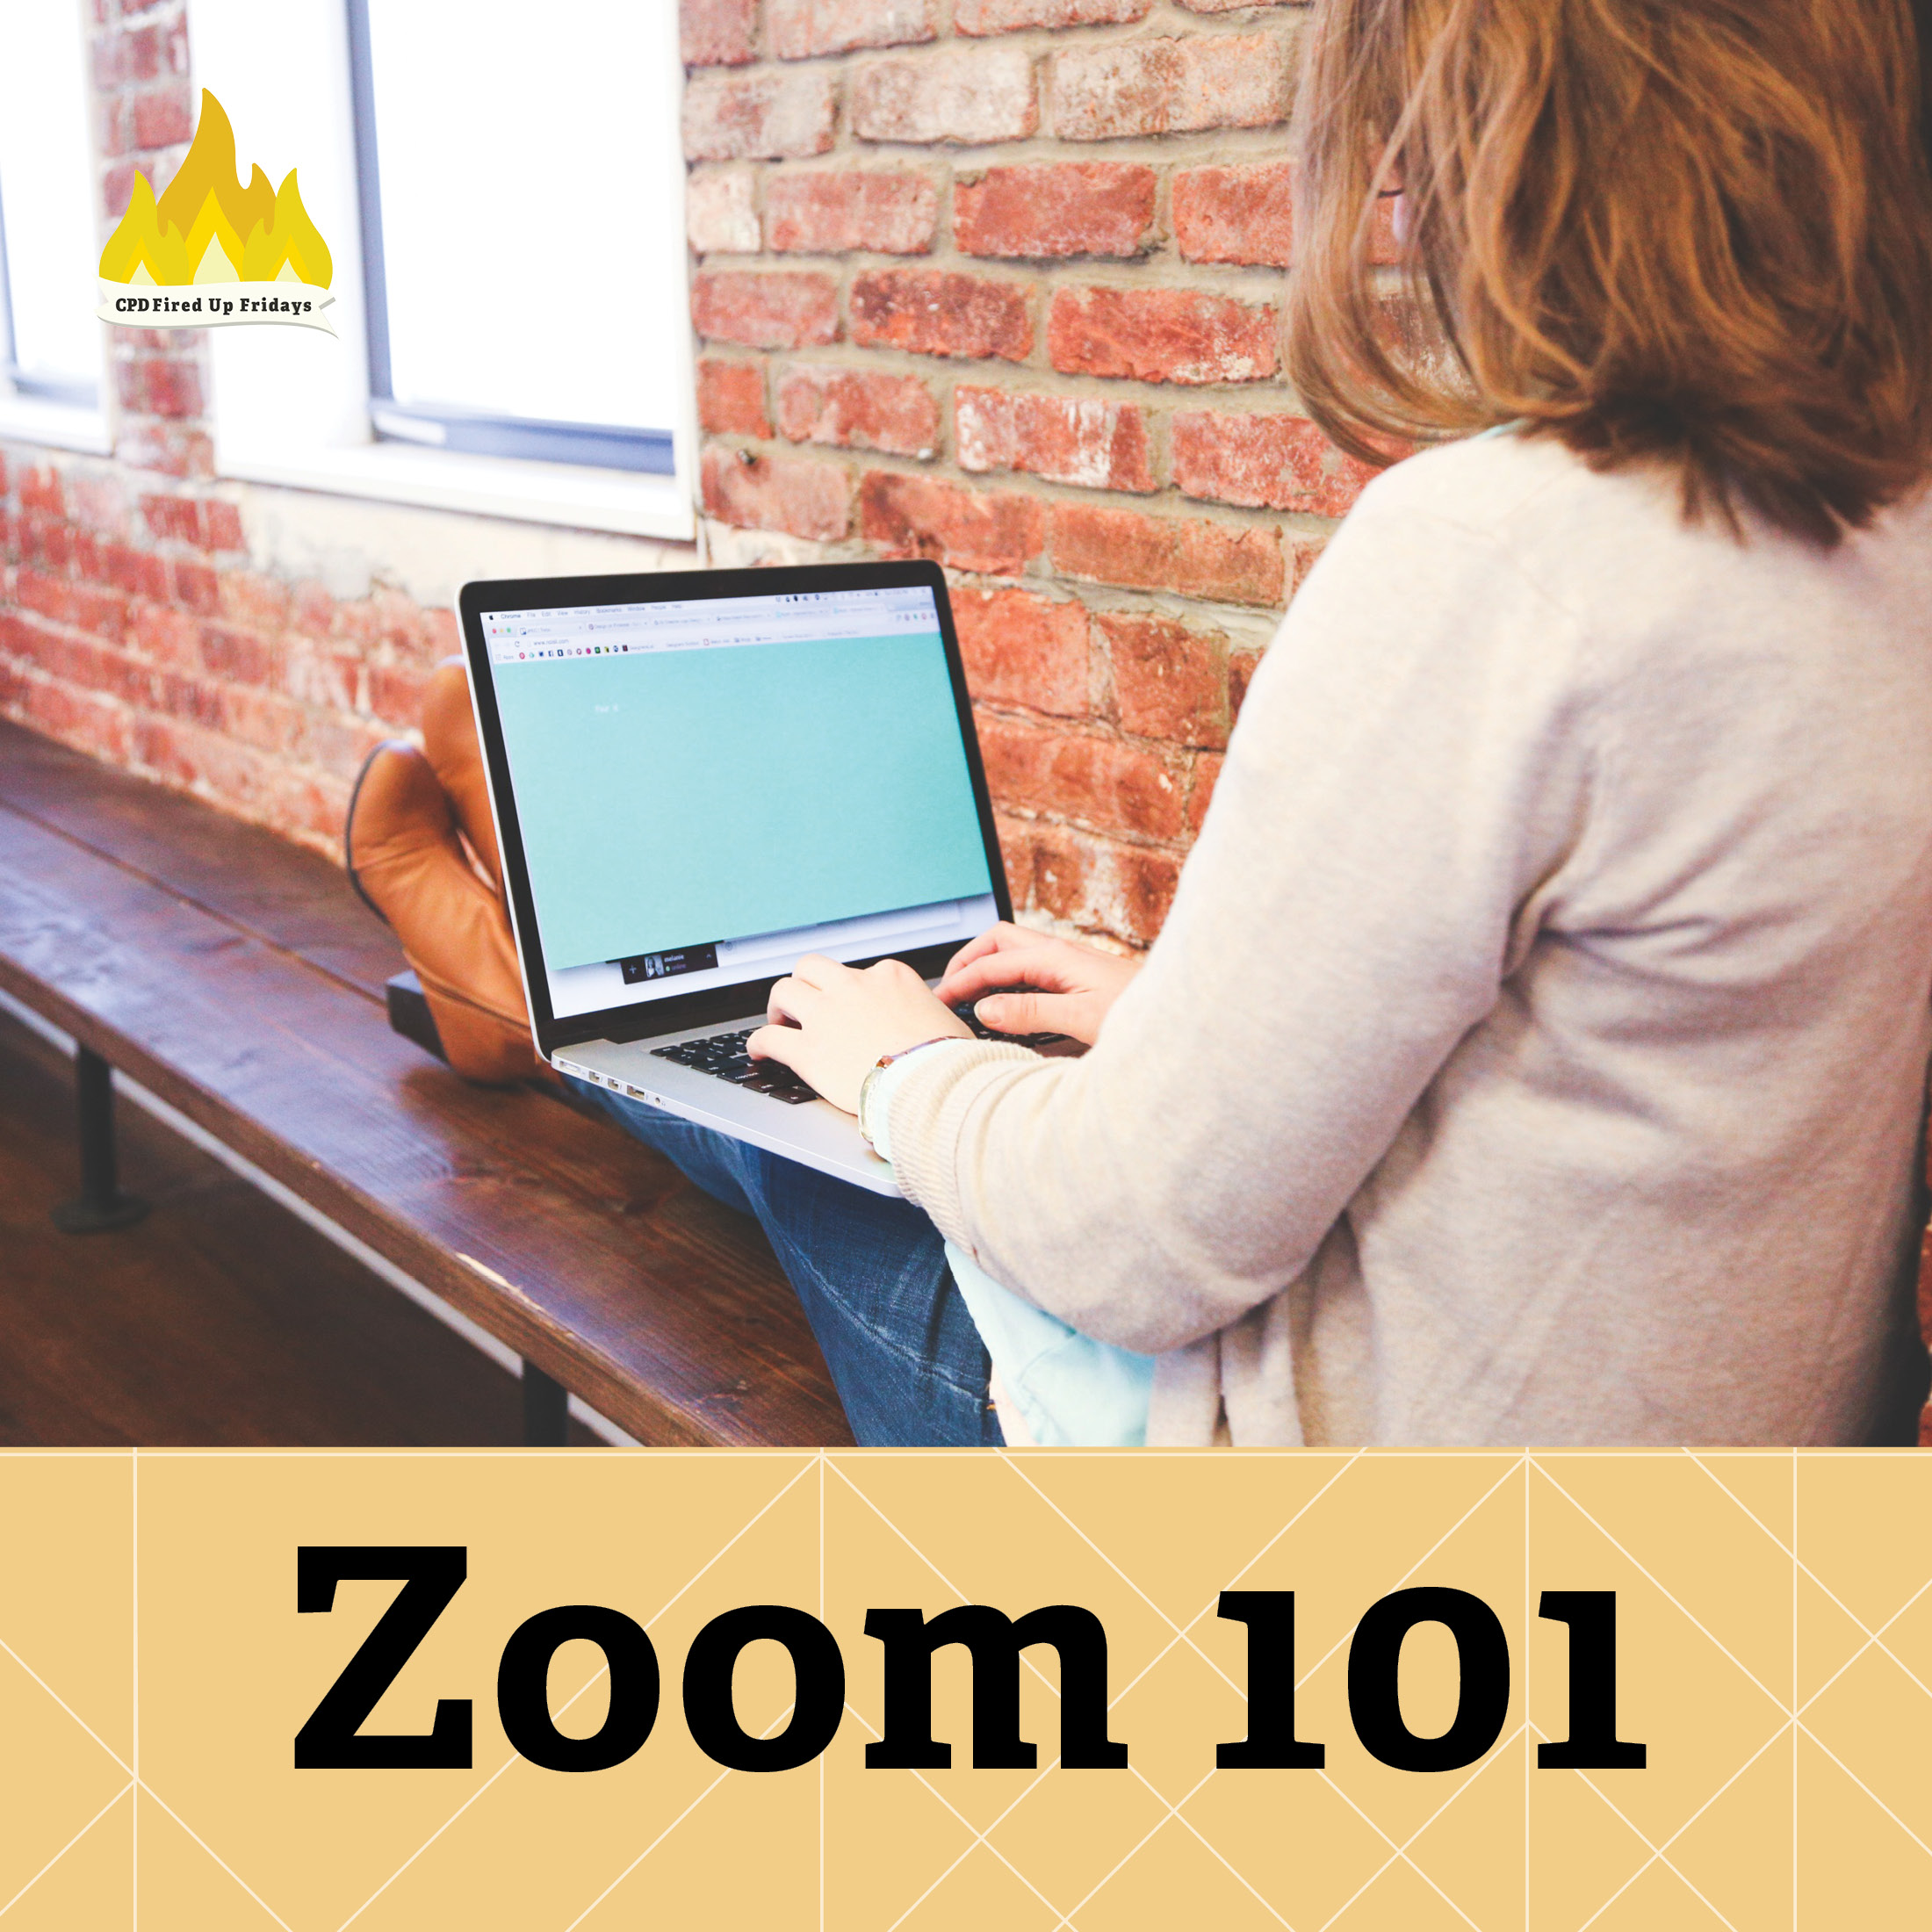 Young woman sitting with her back to the camera. Sitting on her outstretched legs is an open laptop. Text underneath reads: 'Zoom 101'